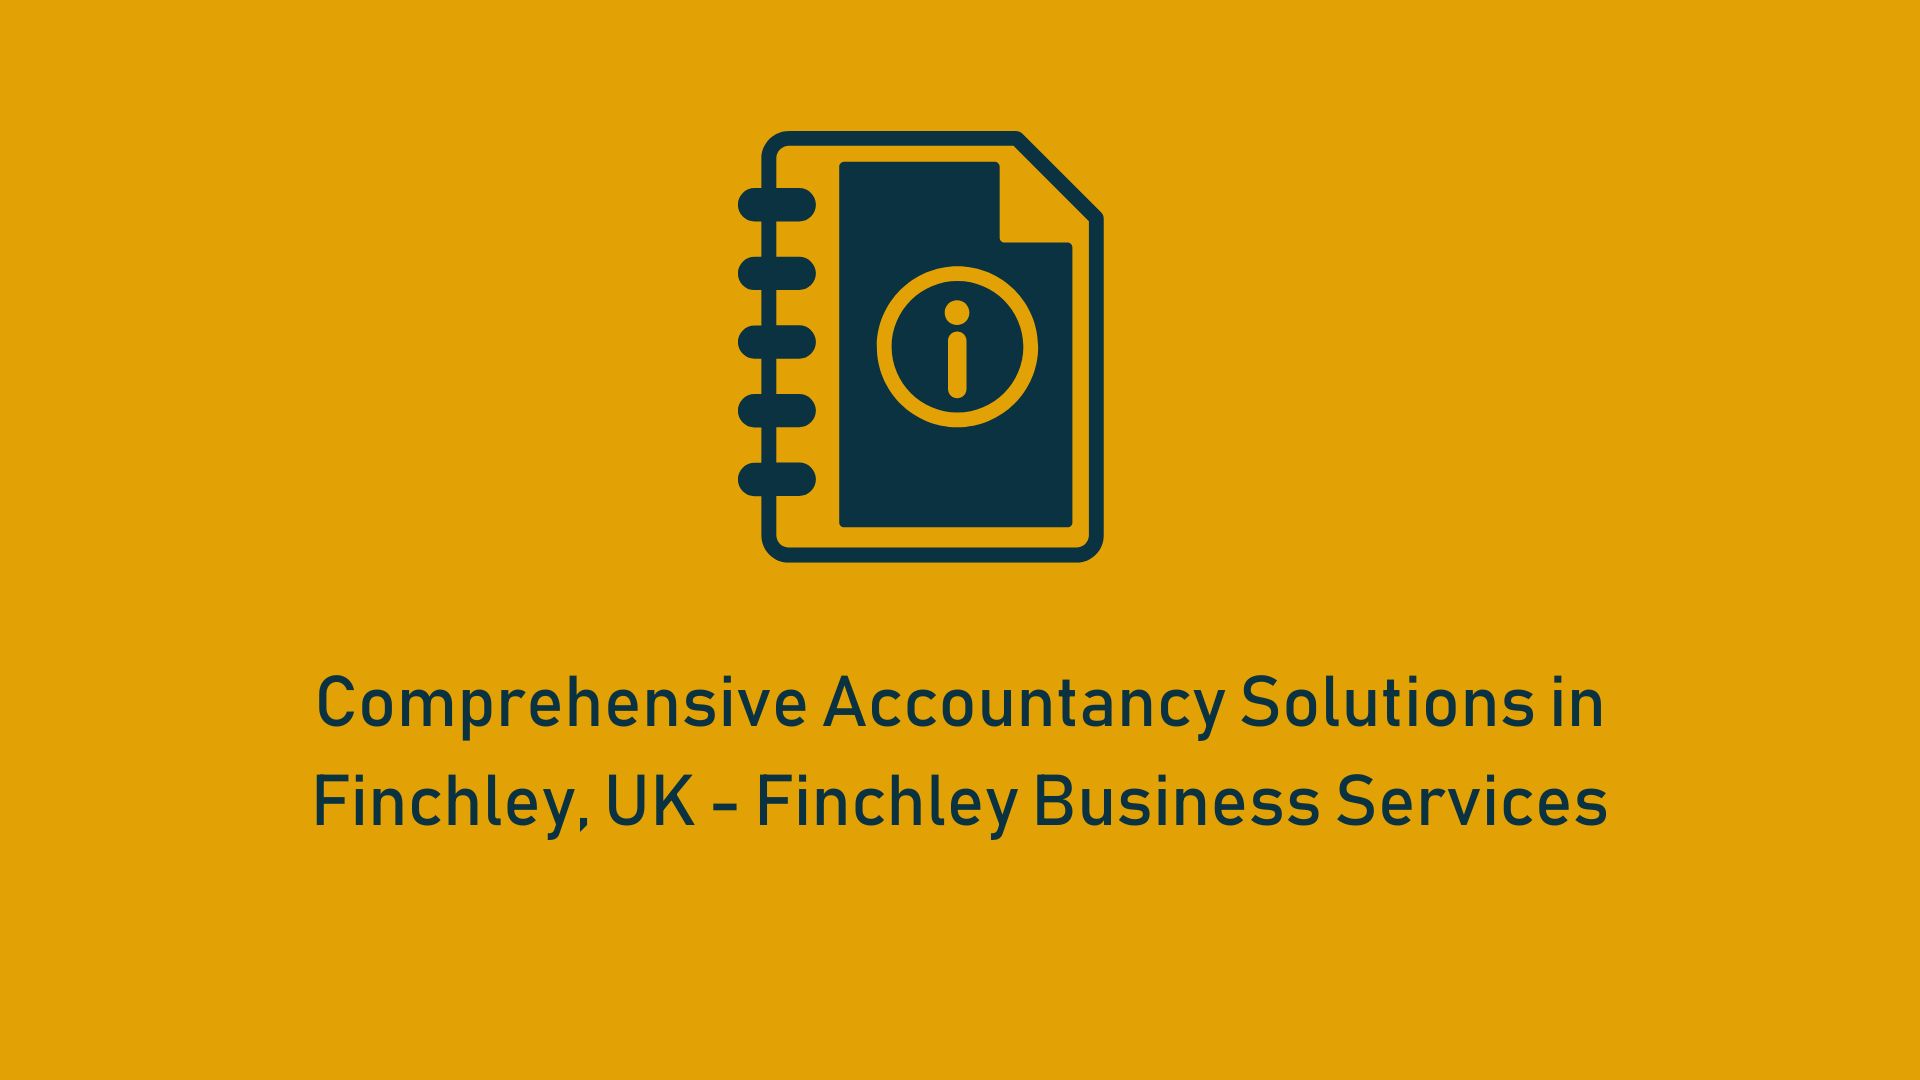 Comprehensive Accountancy Solutions in Finchley, UK - Finchley Business Services